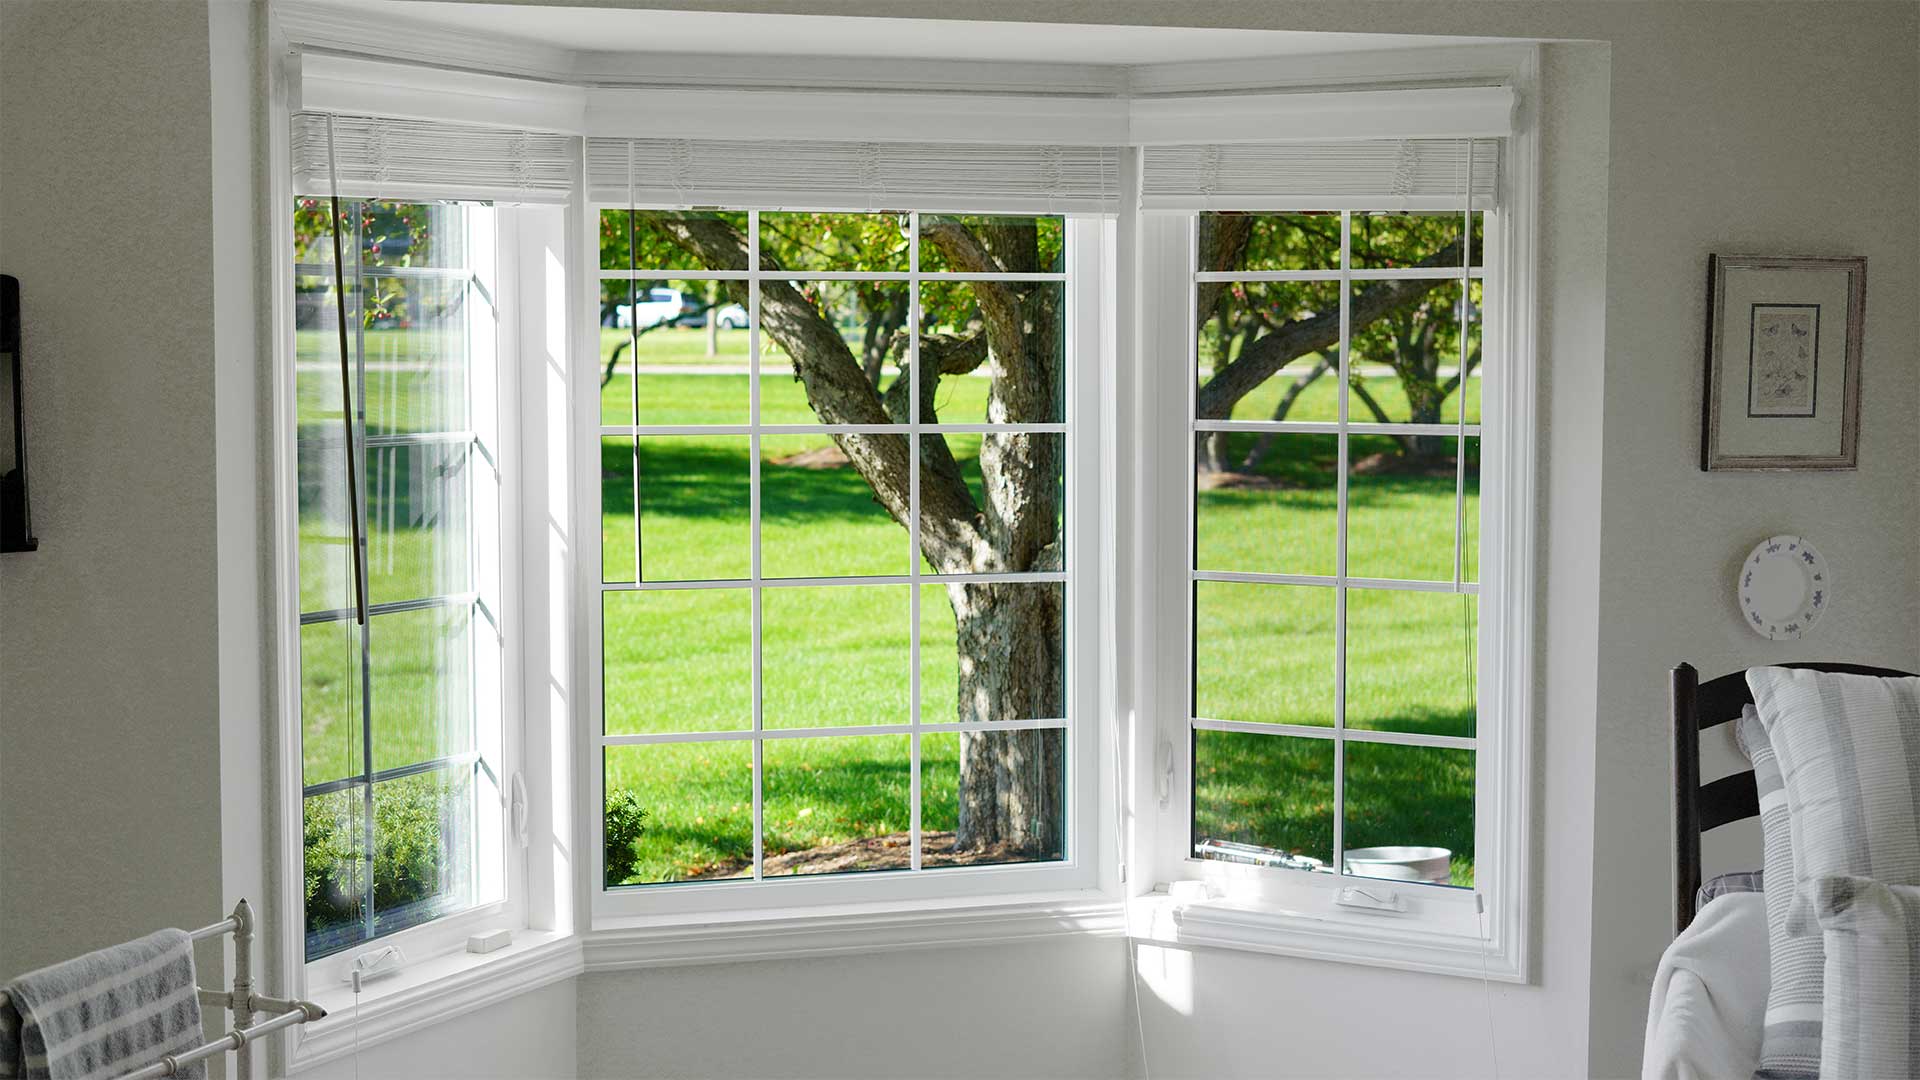 What are the benefits of replacing a window or door?